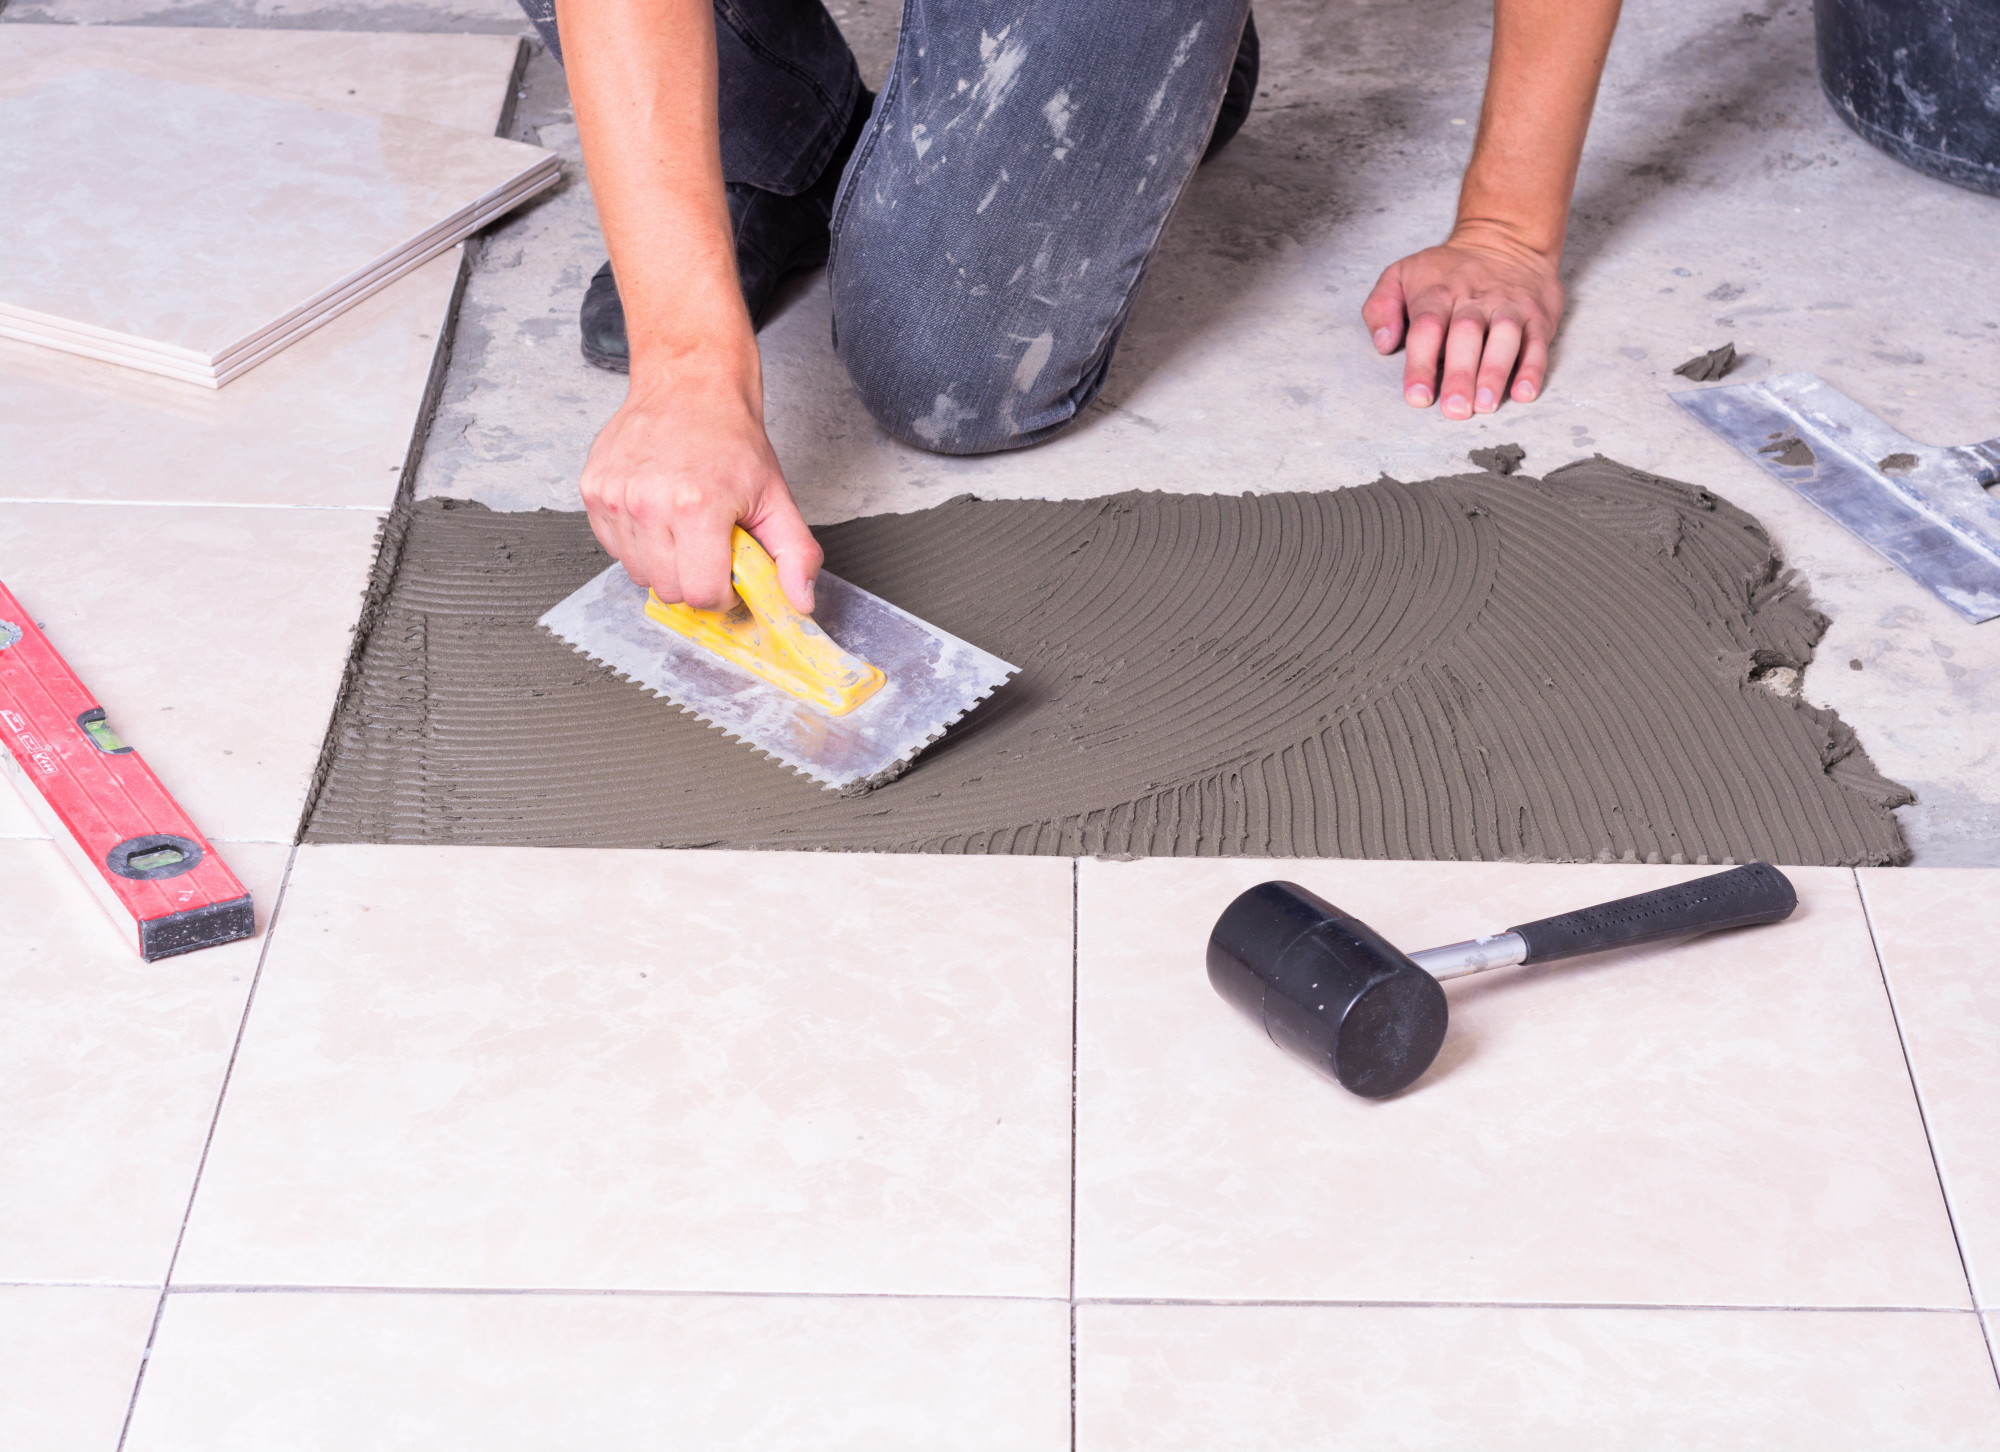 Are you wondering if tile floors are right for your home? Click here for the most important pros and cons of tile flooring to help you decide.